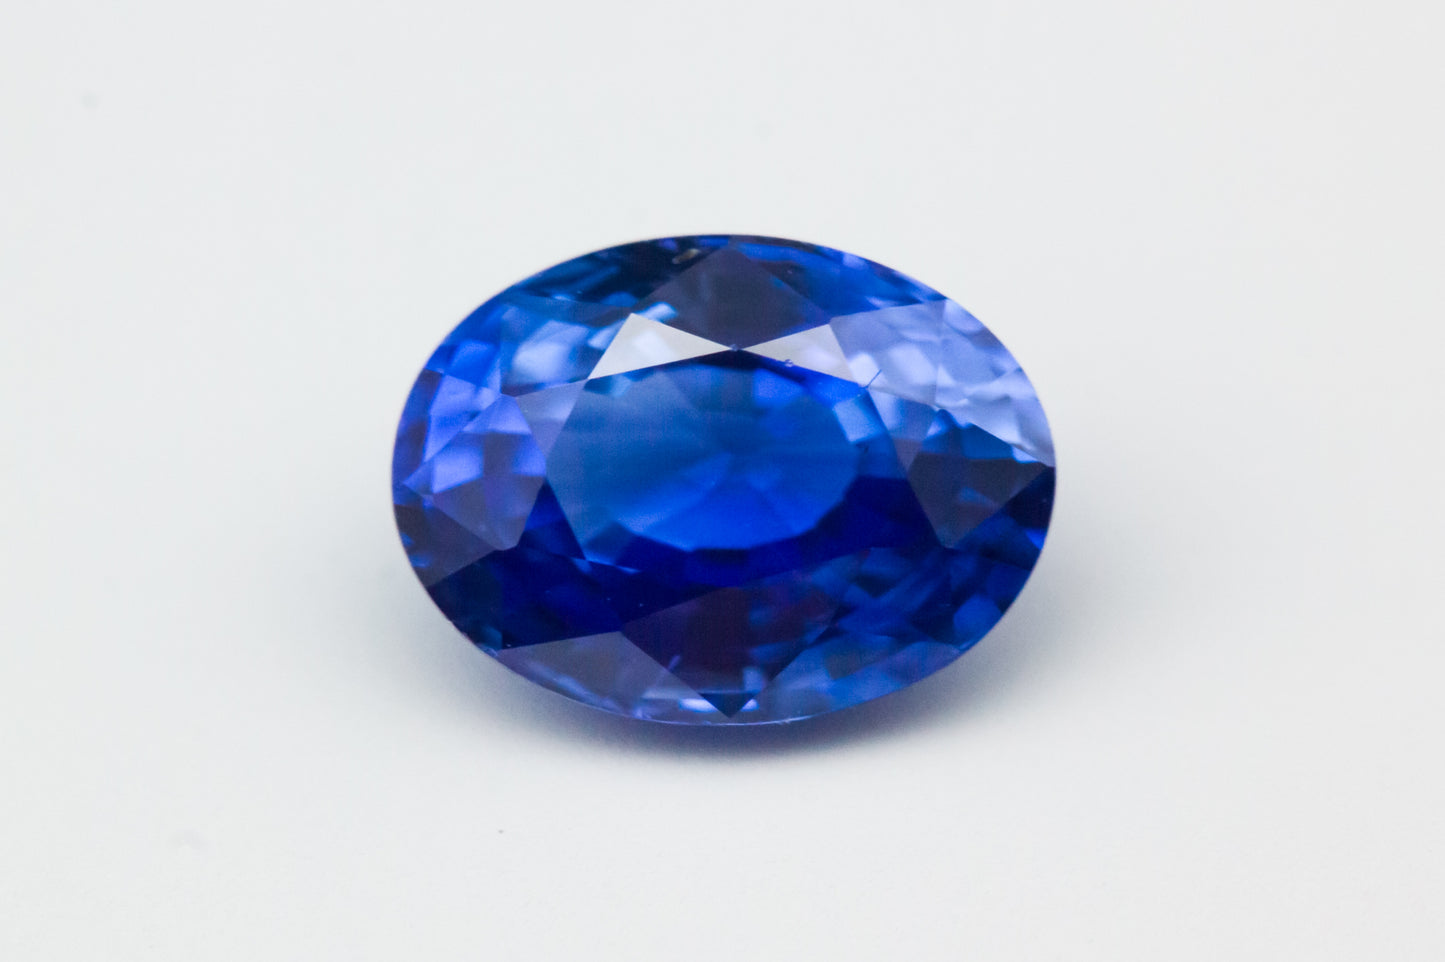 [SOLD] 8.34x6.22mm Oval Ceylon Sapphire Certificated (SACV86A)